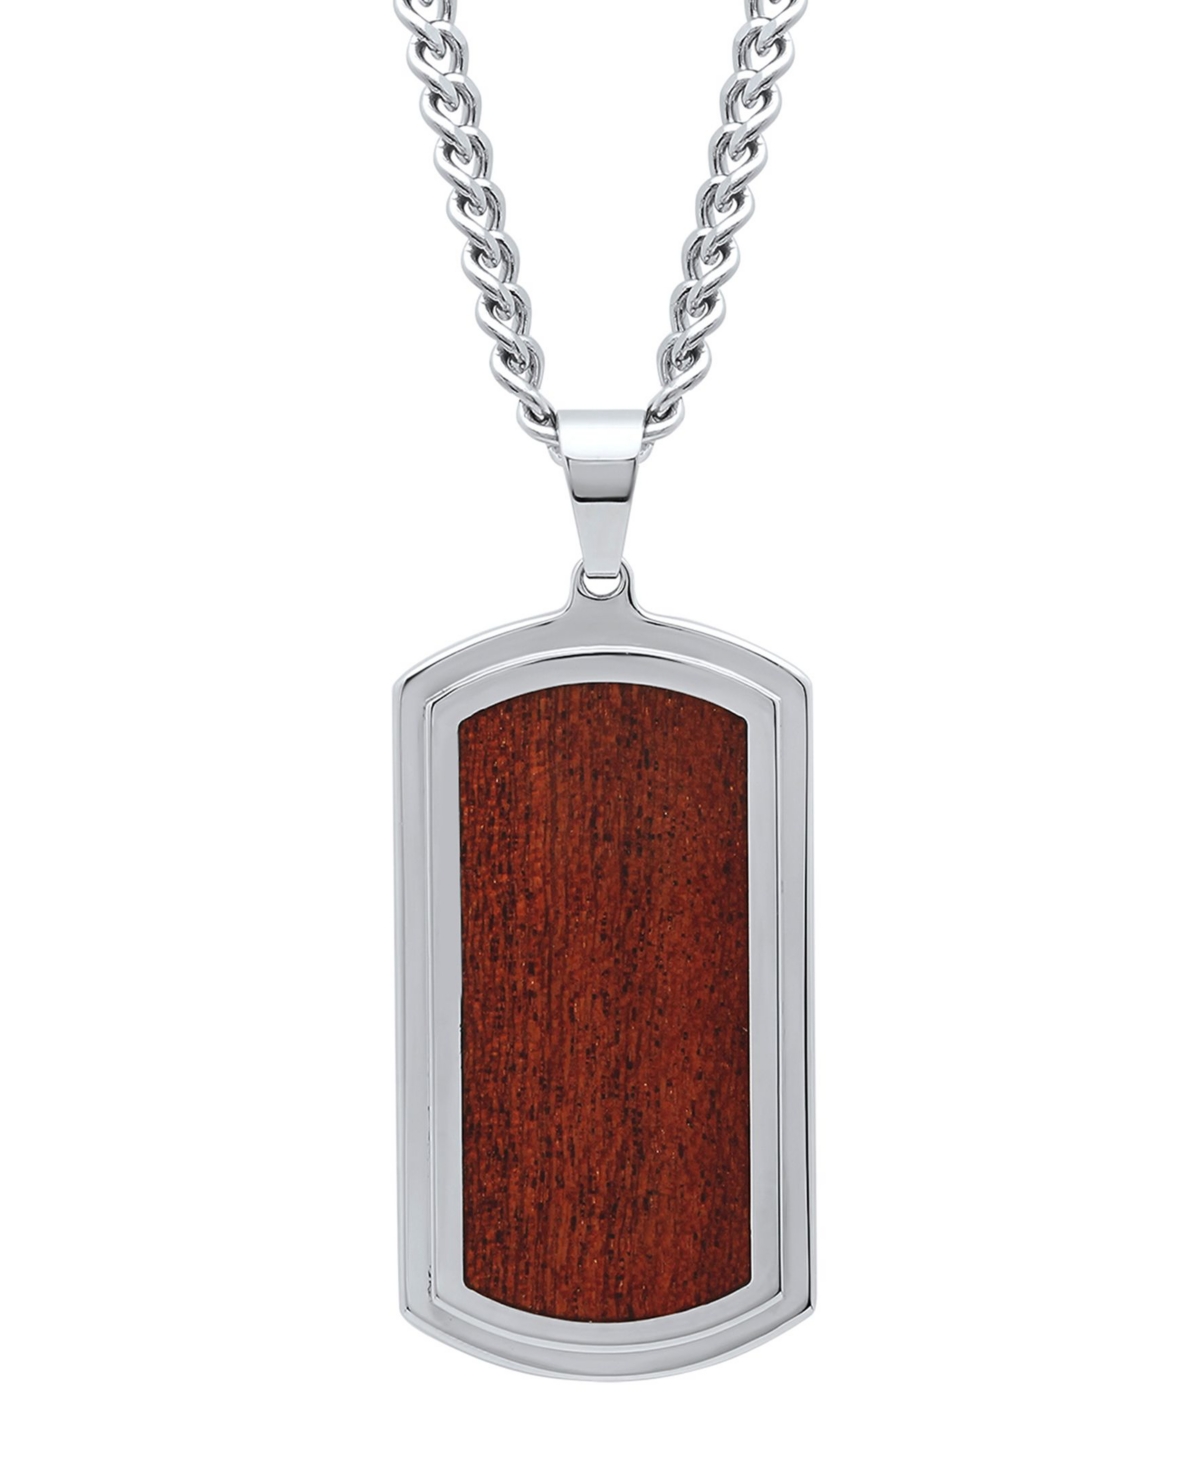 C & c Jewelry Men's Woodgrain Dog Tag in Stainless Steel Pendant Necklace